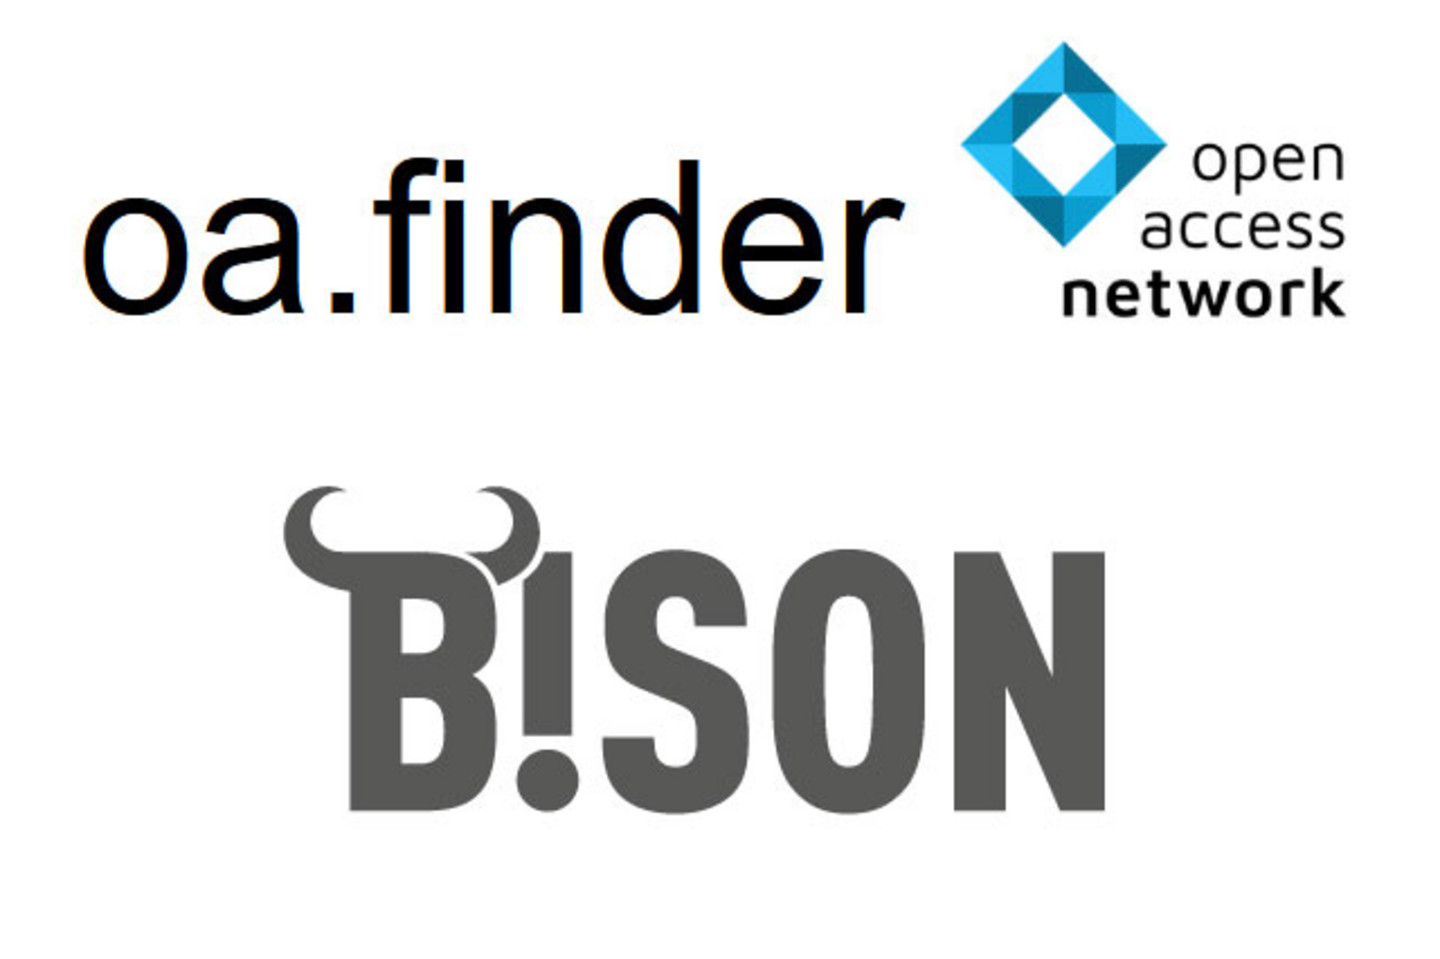 Logos of the oa.finder and Bison